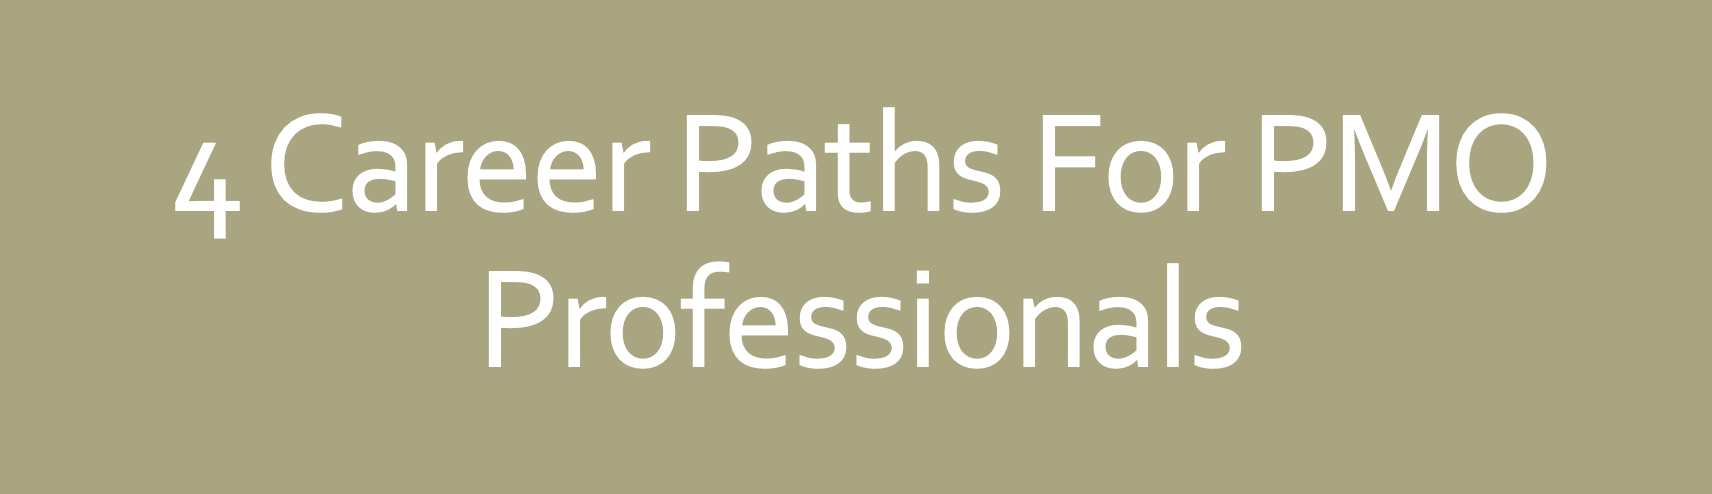 4 Career Paths For PMO Professionals